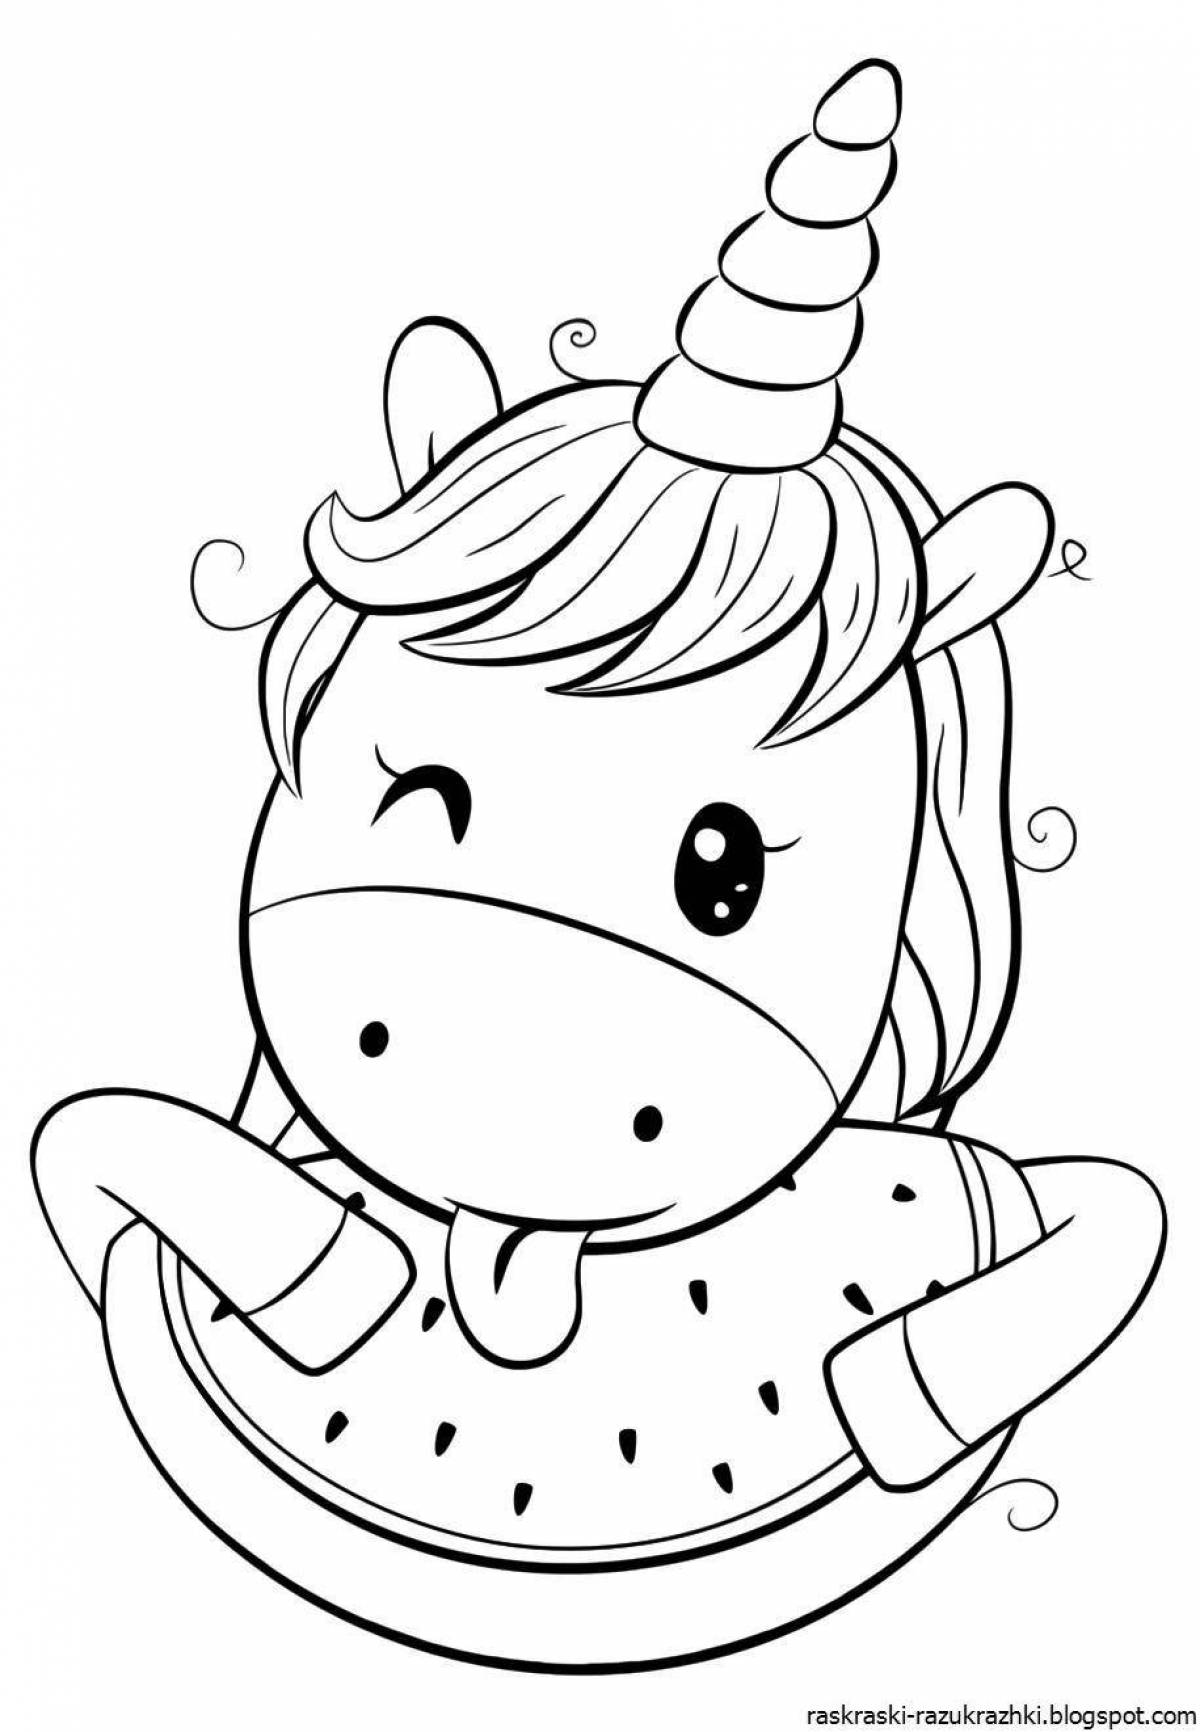 Funny coloring book for children 5-6 years old unicorns